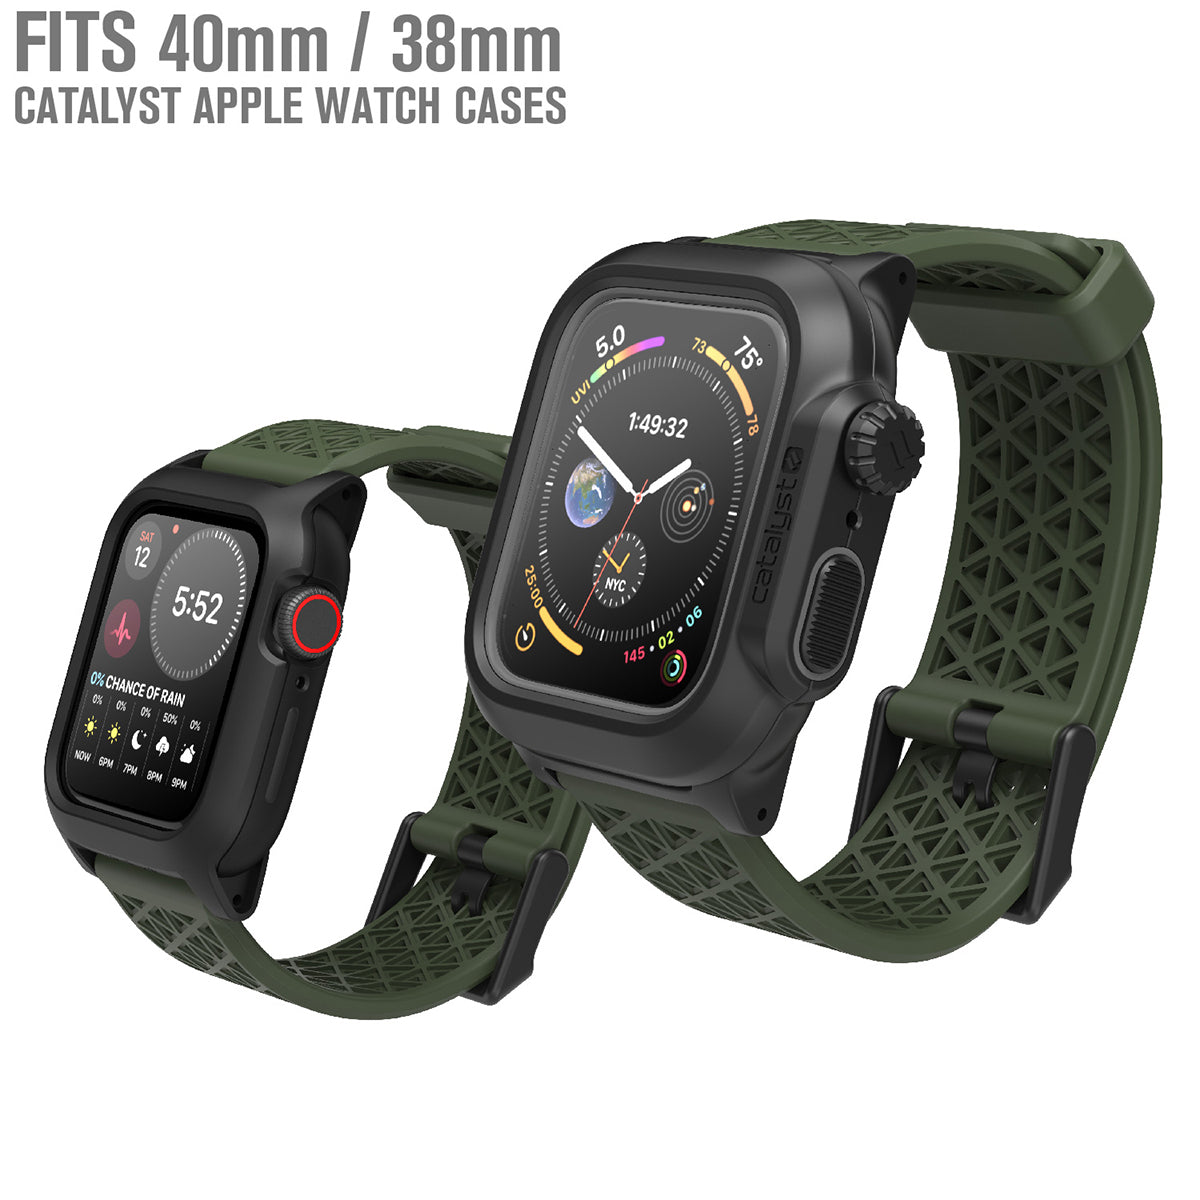 catalyst apple watch series 9 8 7 6 5 4 SE Gen 2 1 38 40 41mm sport band buckle edition two apple watch with catalyst impact protection and waterproof case with army green sport band text reads fits 40mm 38mm catalyst apple watch cases